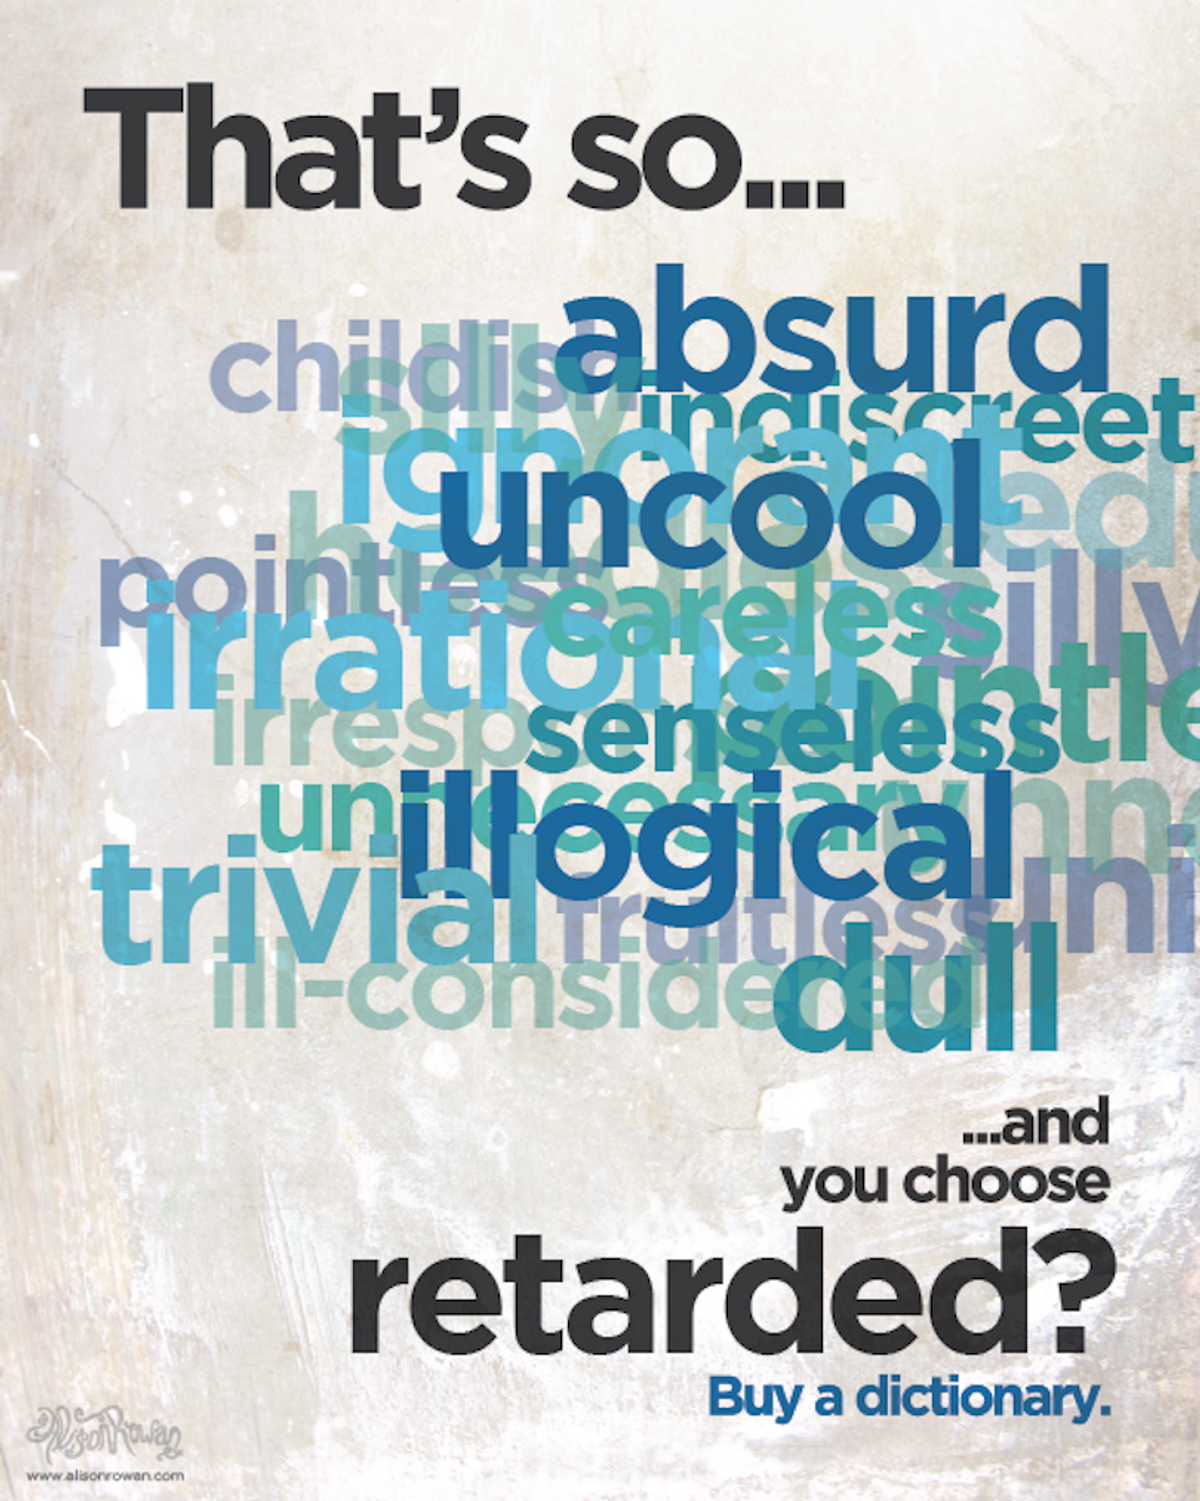 26 Words To Use Instead Of The R-Word